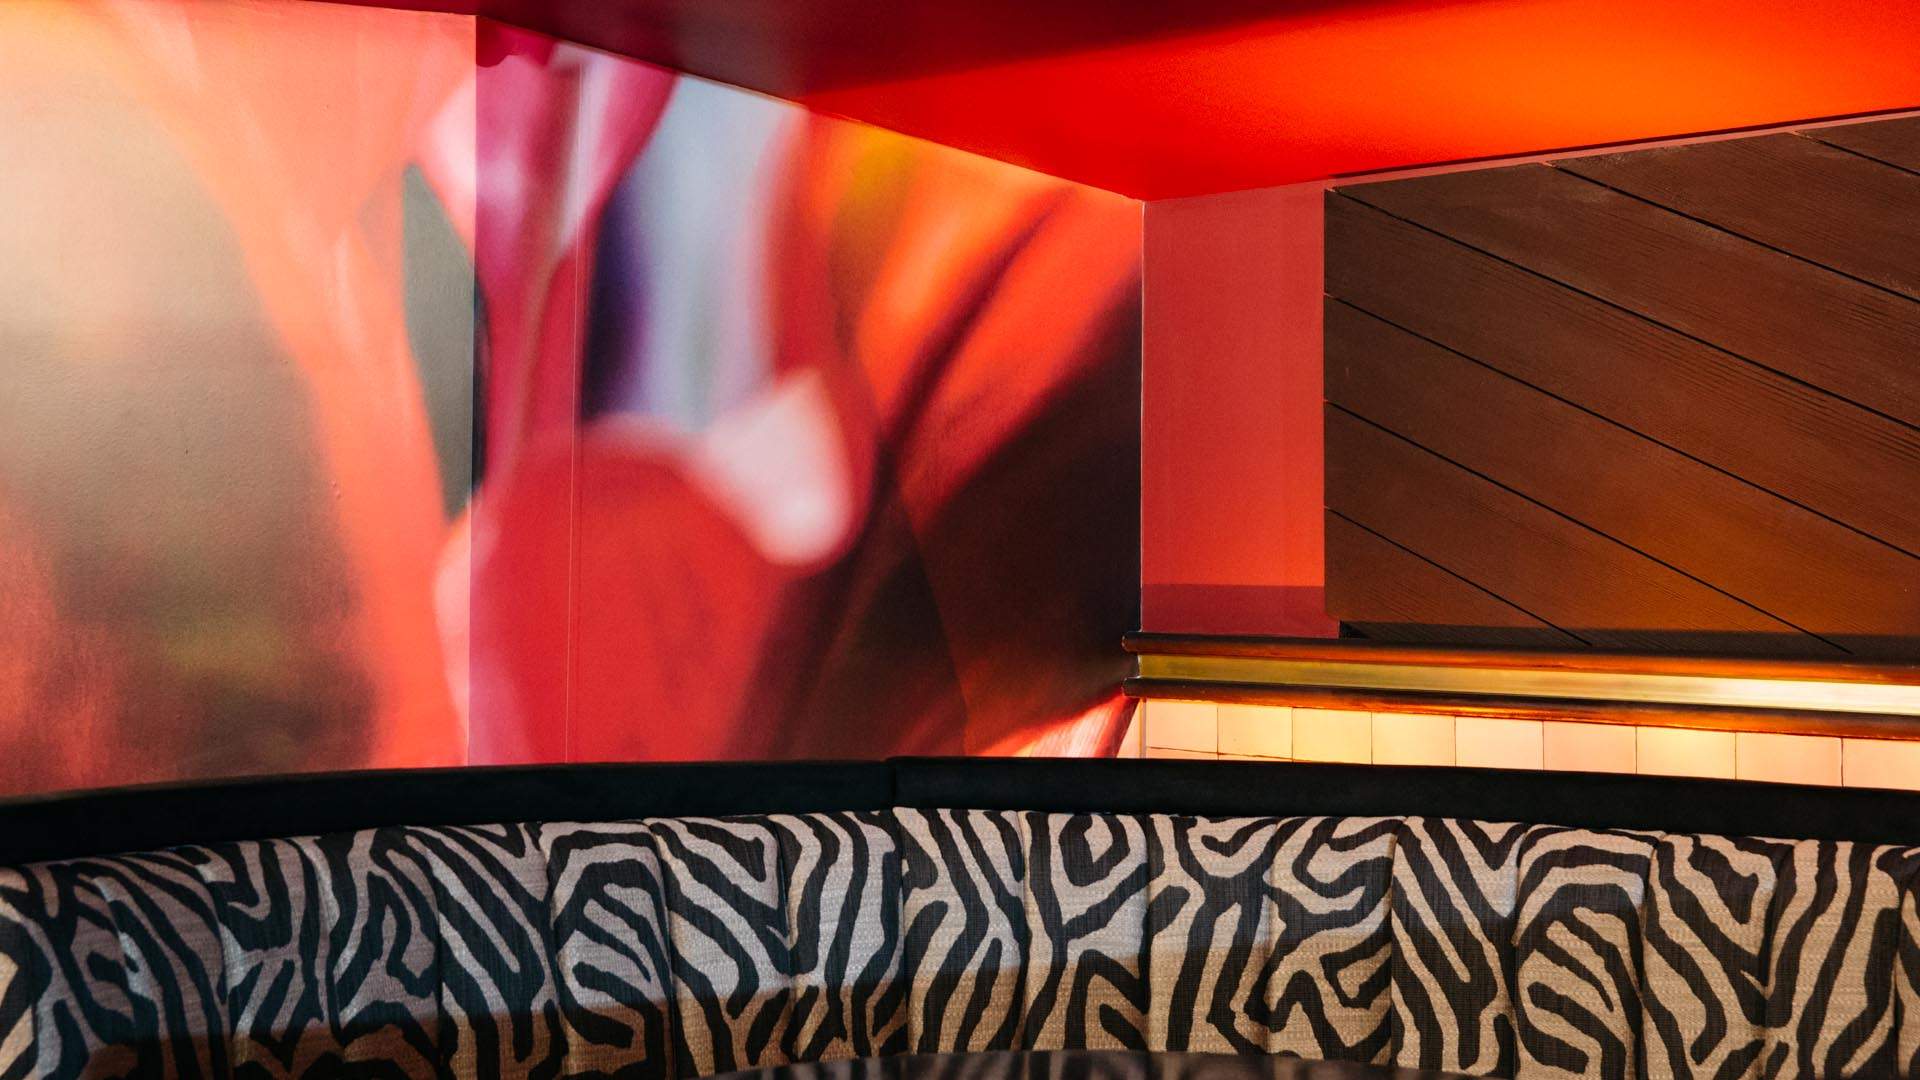 A First Look Inside Kings Cross' New Miami-Inspired Flamingo Lounge